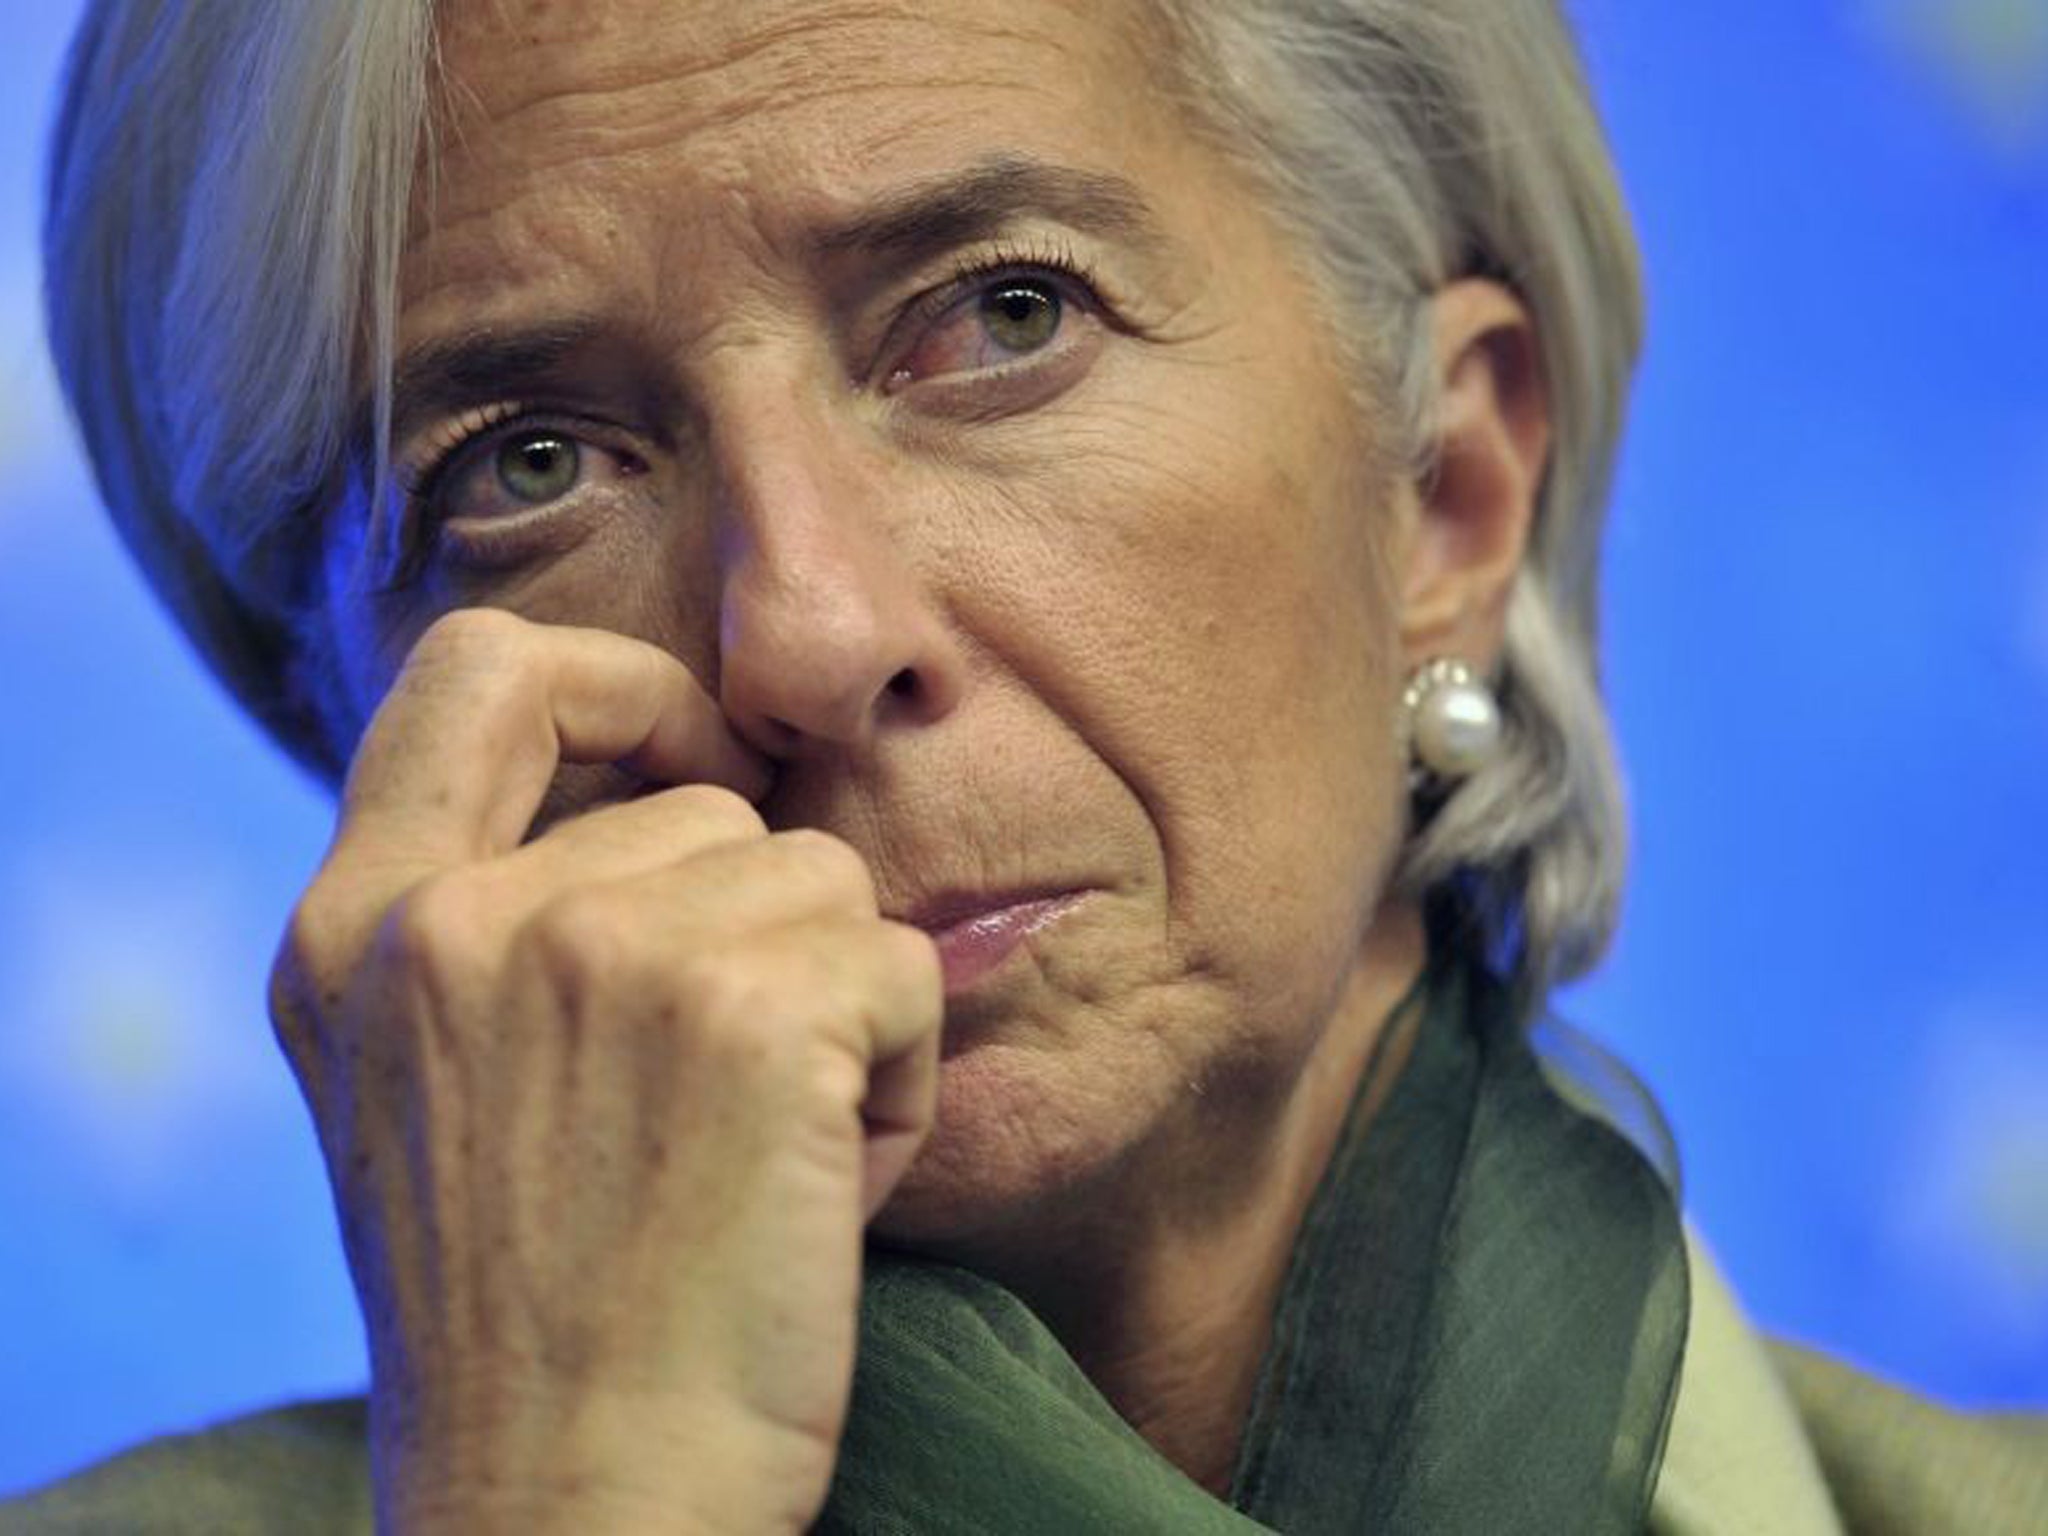 The investigation into IMF chief Christine Lagarde concerns the payment of almost €400m in state compensation to a disgraced French tycoon, Bernard Tapie